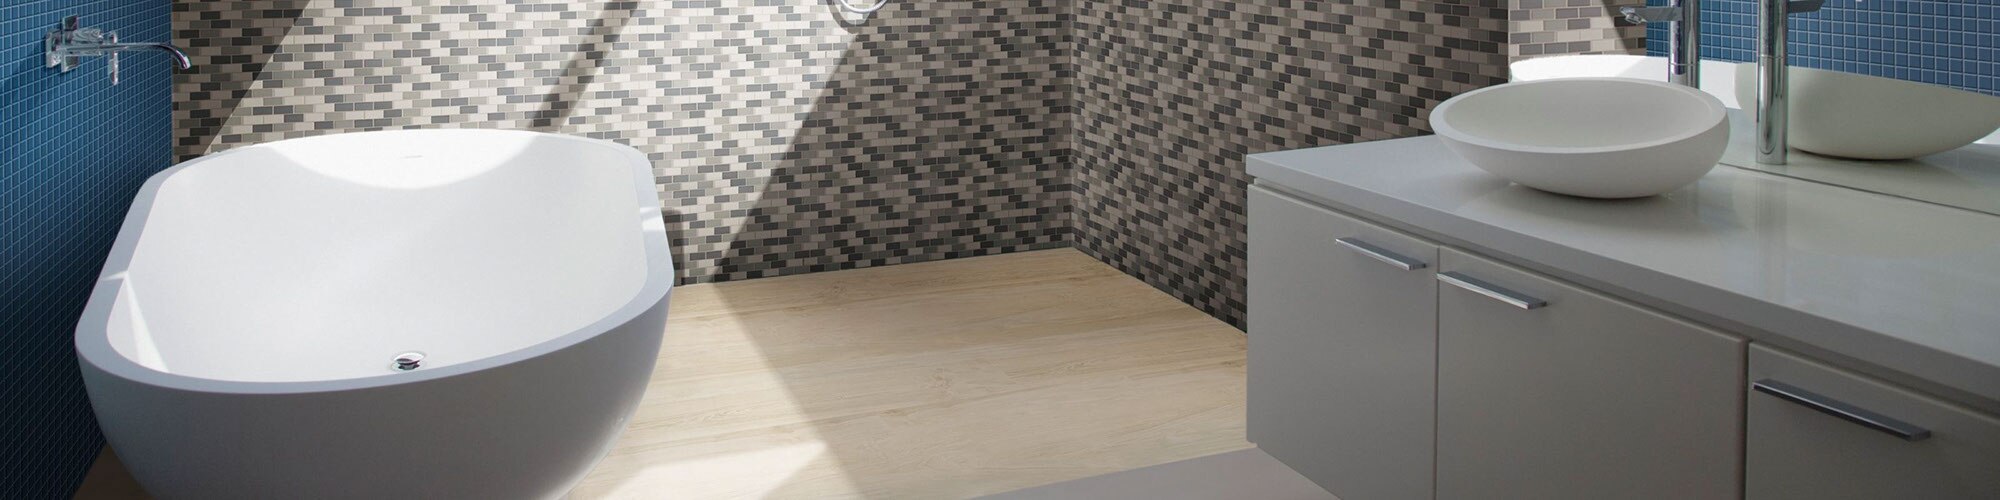 Bathroom with soaker tub, large shower with neutral-colored variegated mosaic wall tile and wood-look shower floor tile.